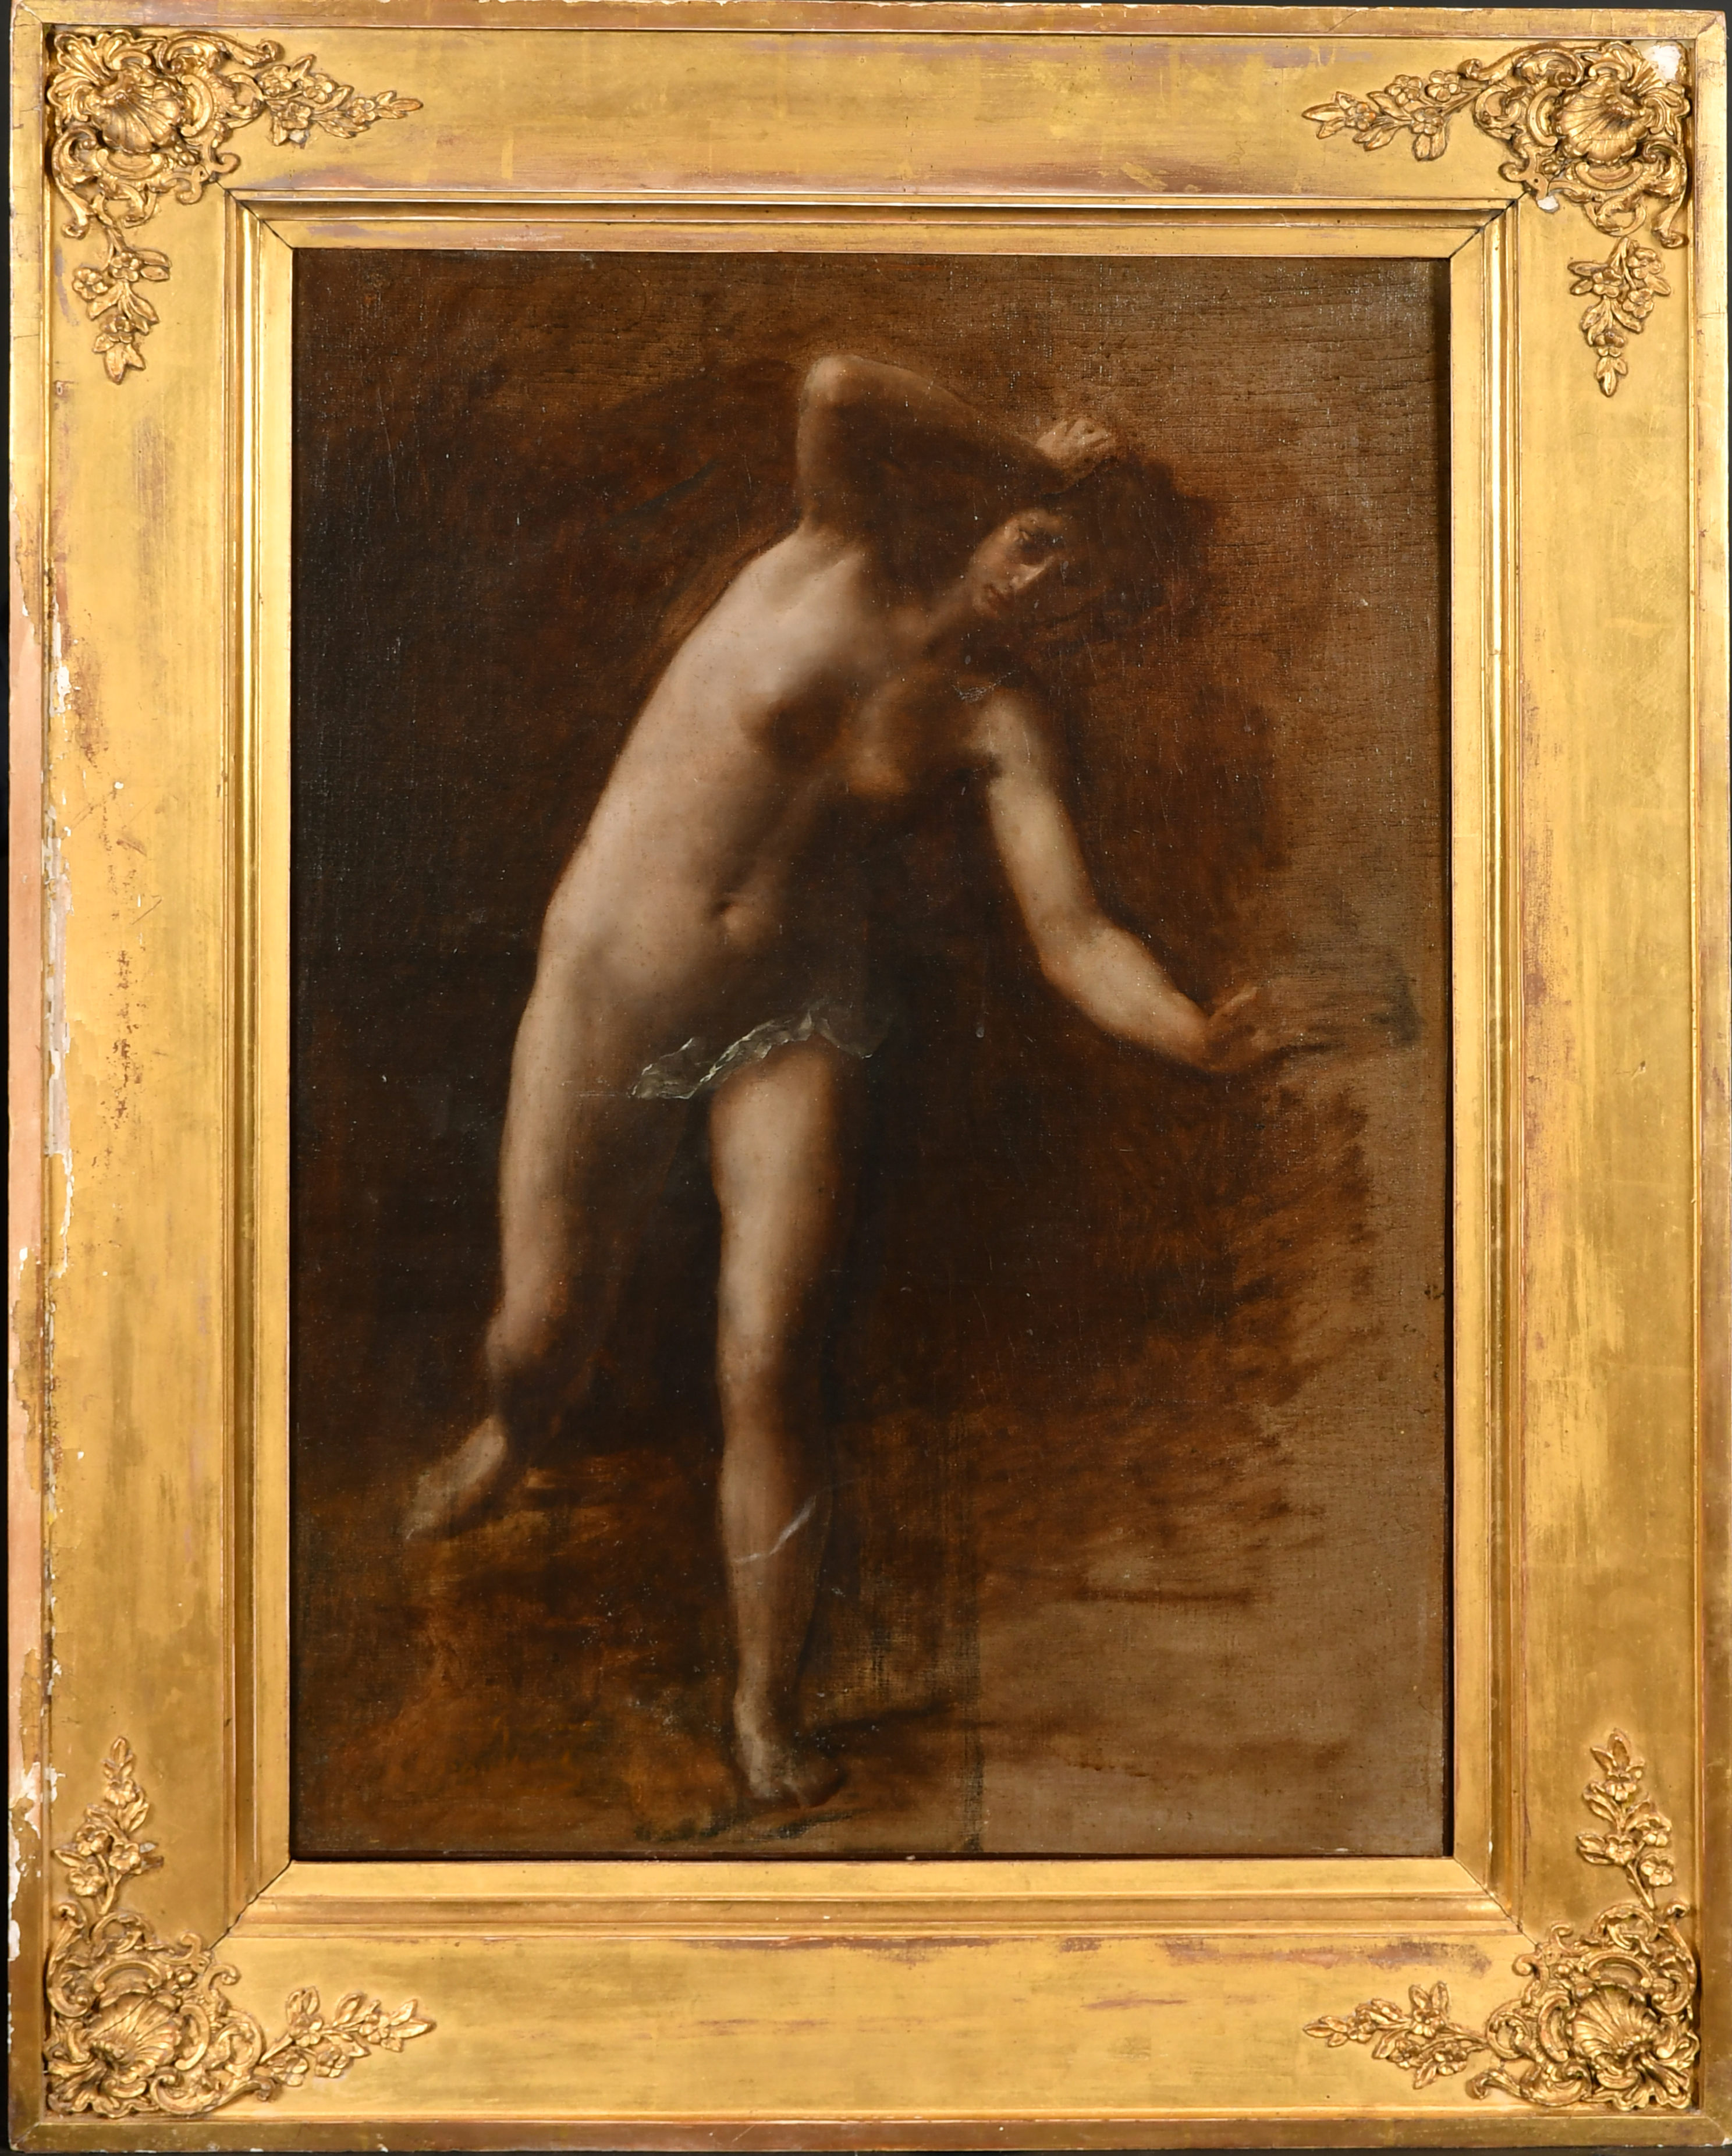 Early 19th Century French School. A Standing Female Nude, Oil on canvas, 27.5" x 19" (69.8 x 48.2cm) - Image 2 of 3